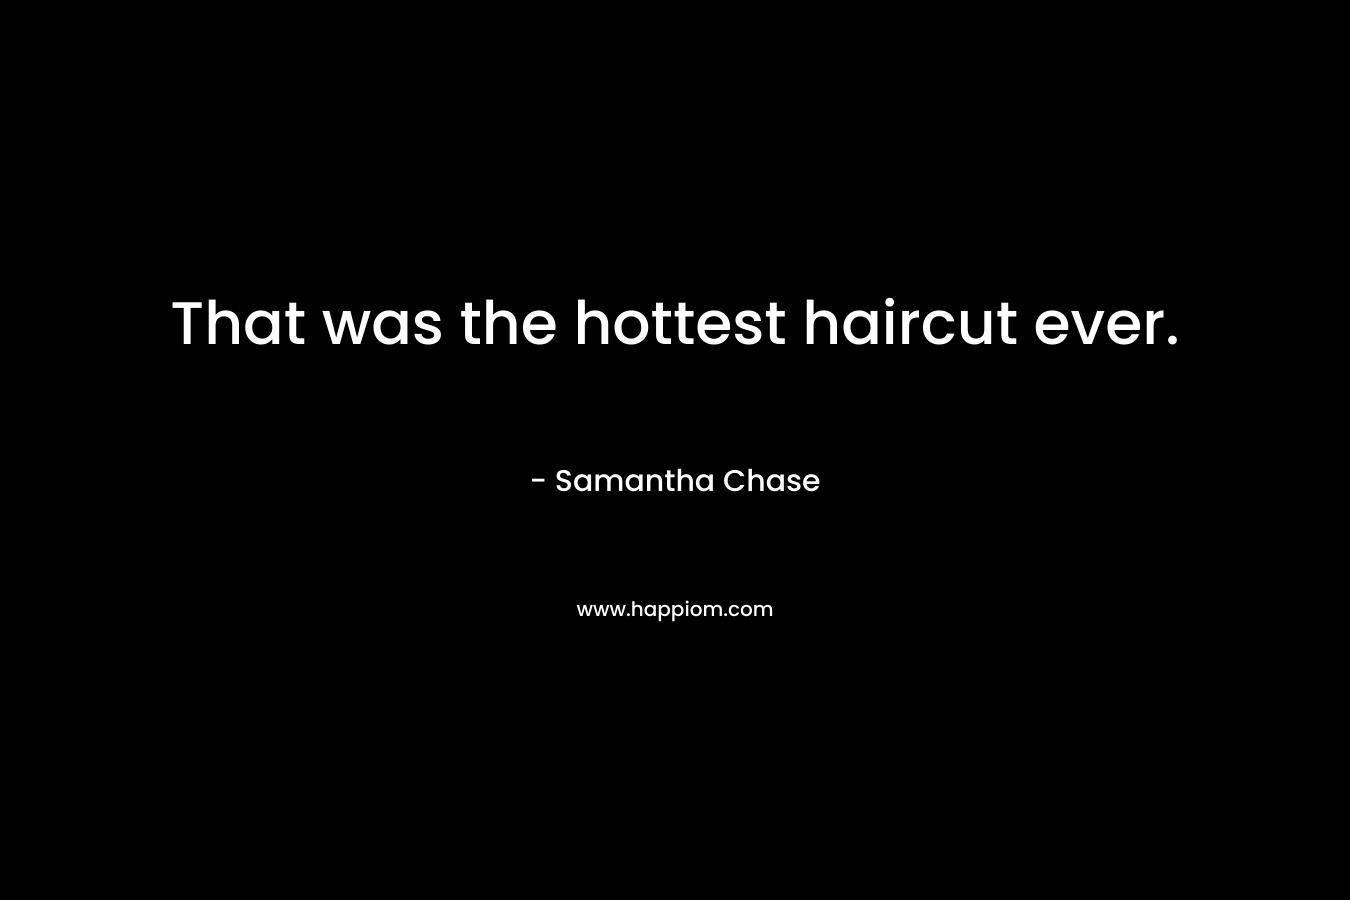 That was the hottest haircut ever. – Samantha Chase